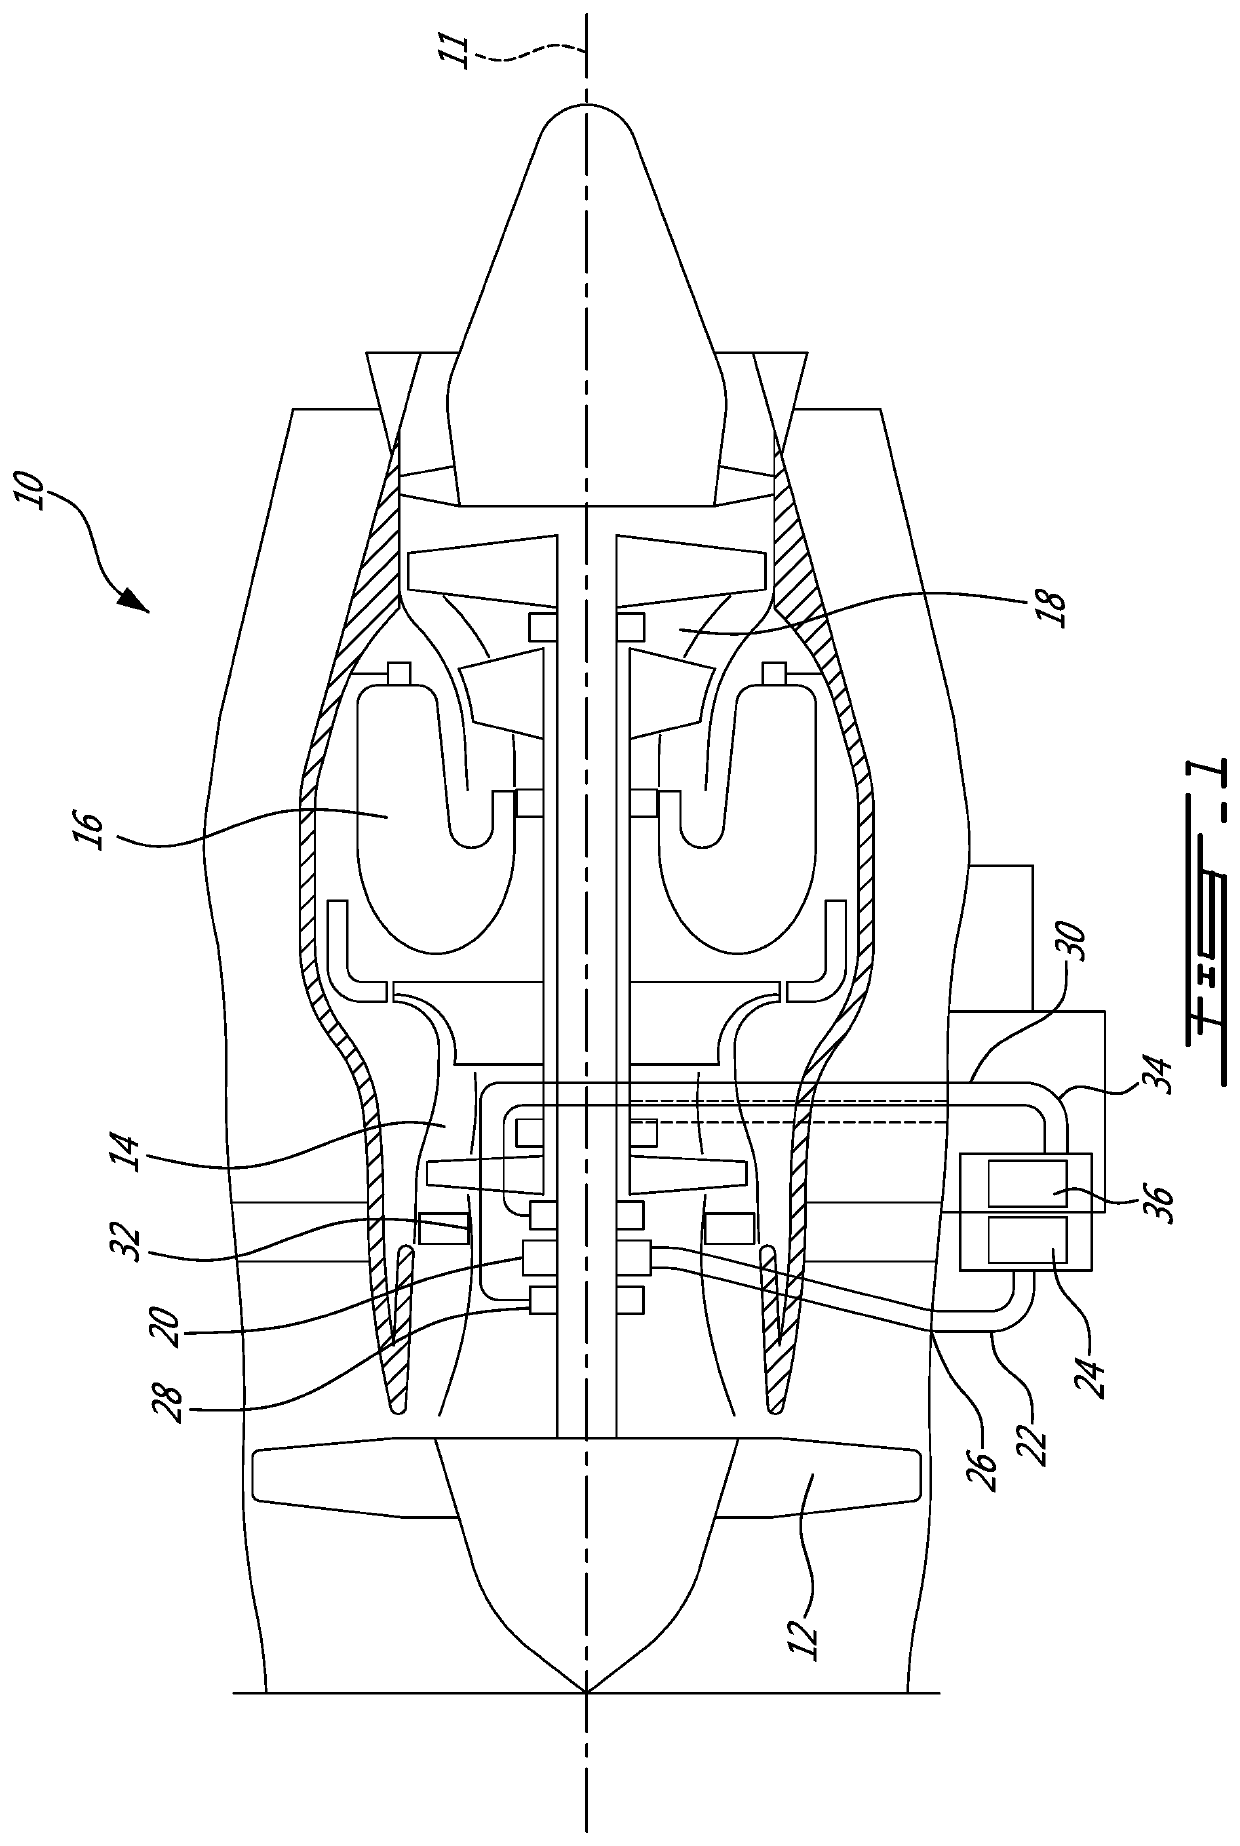 Method of identifying a source component of particulate debris in an aircraft engine